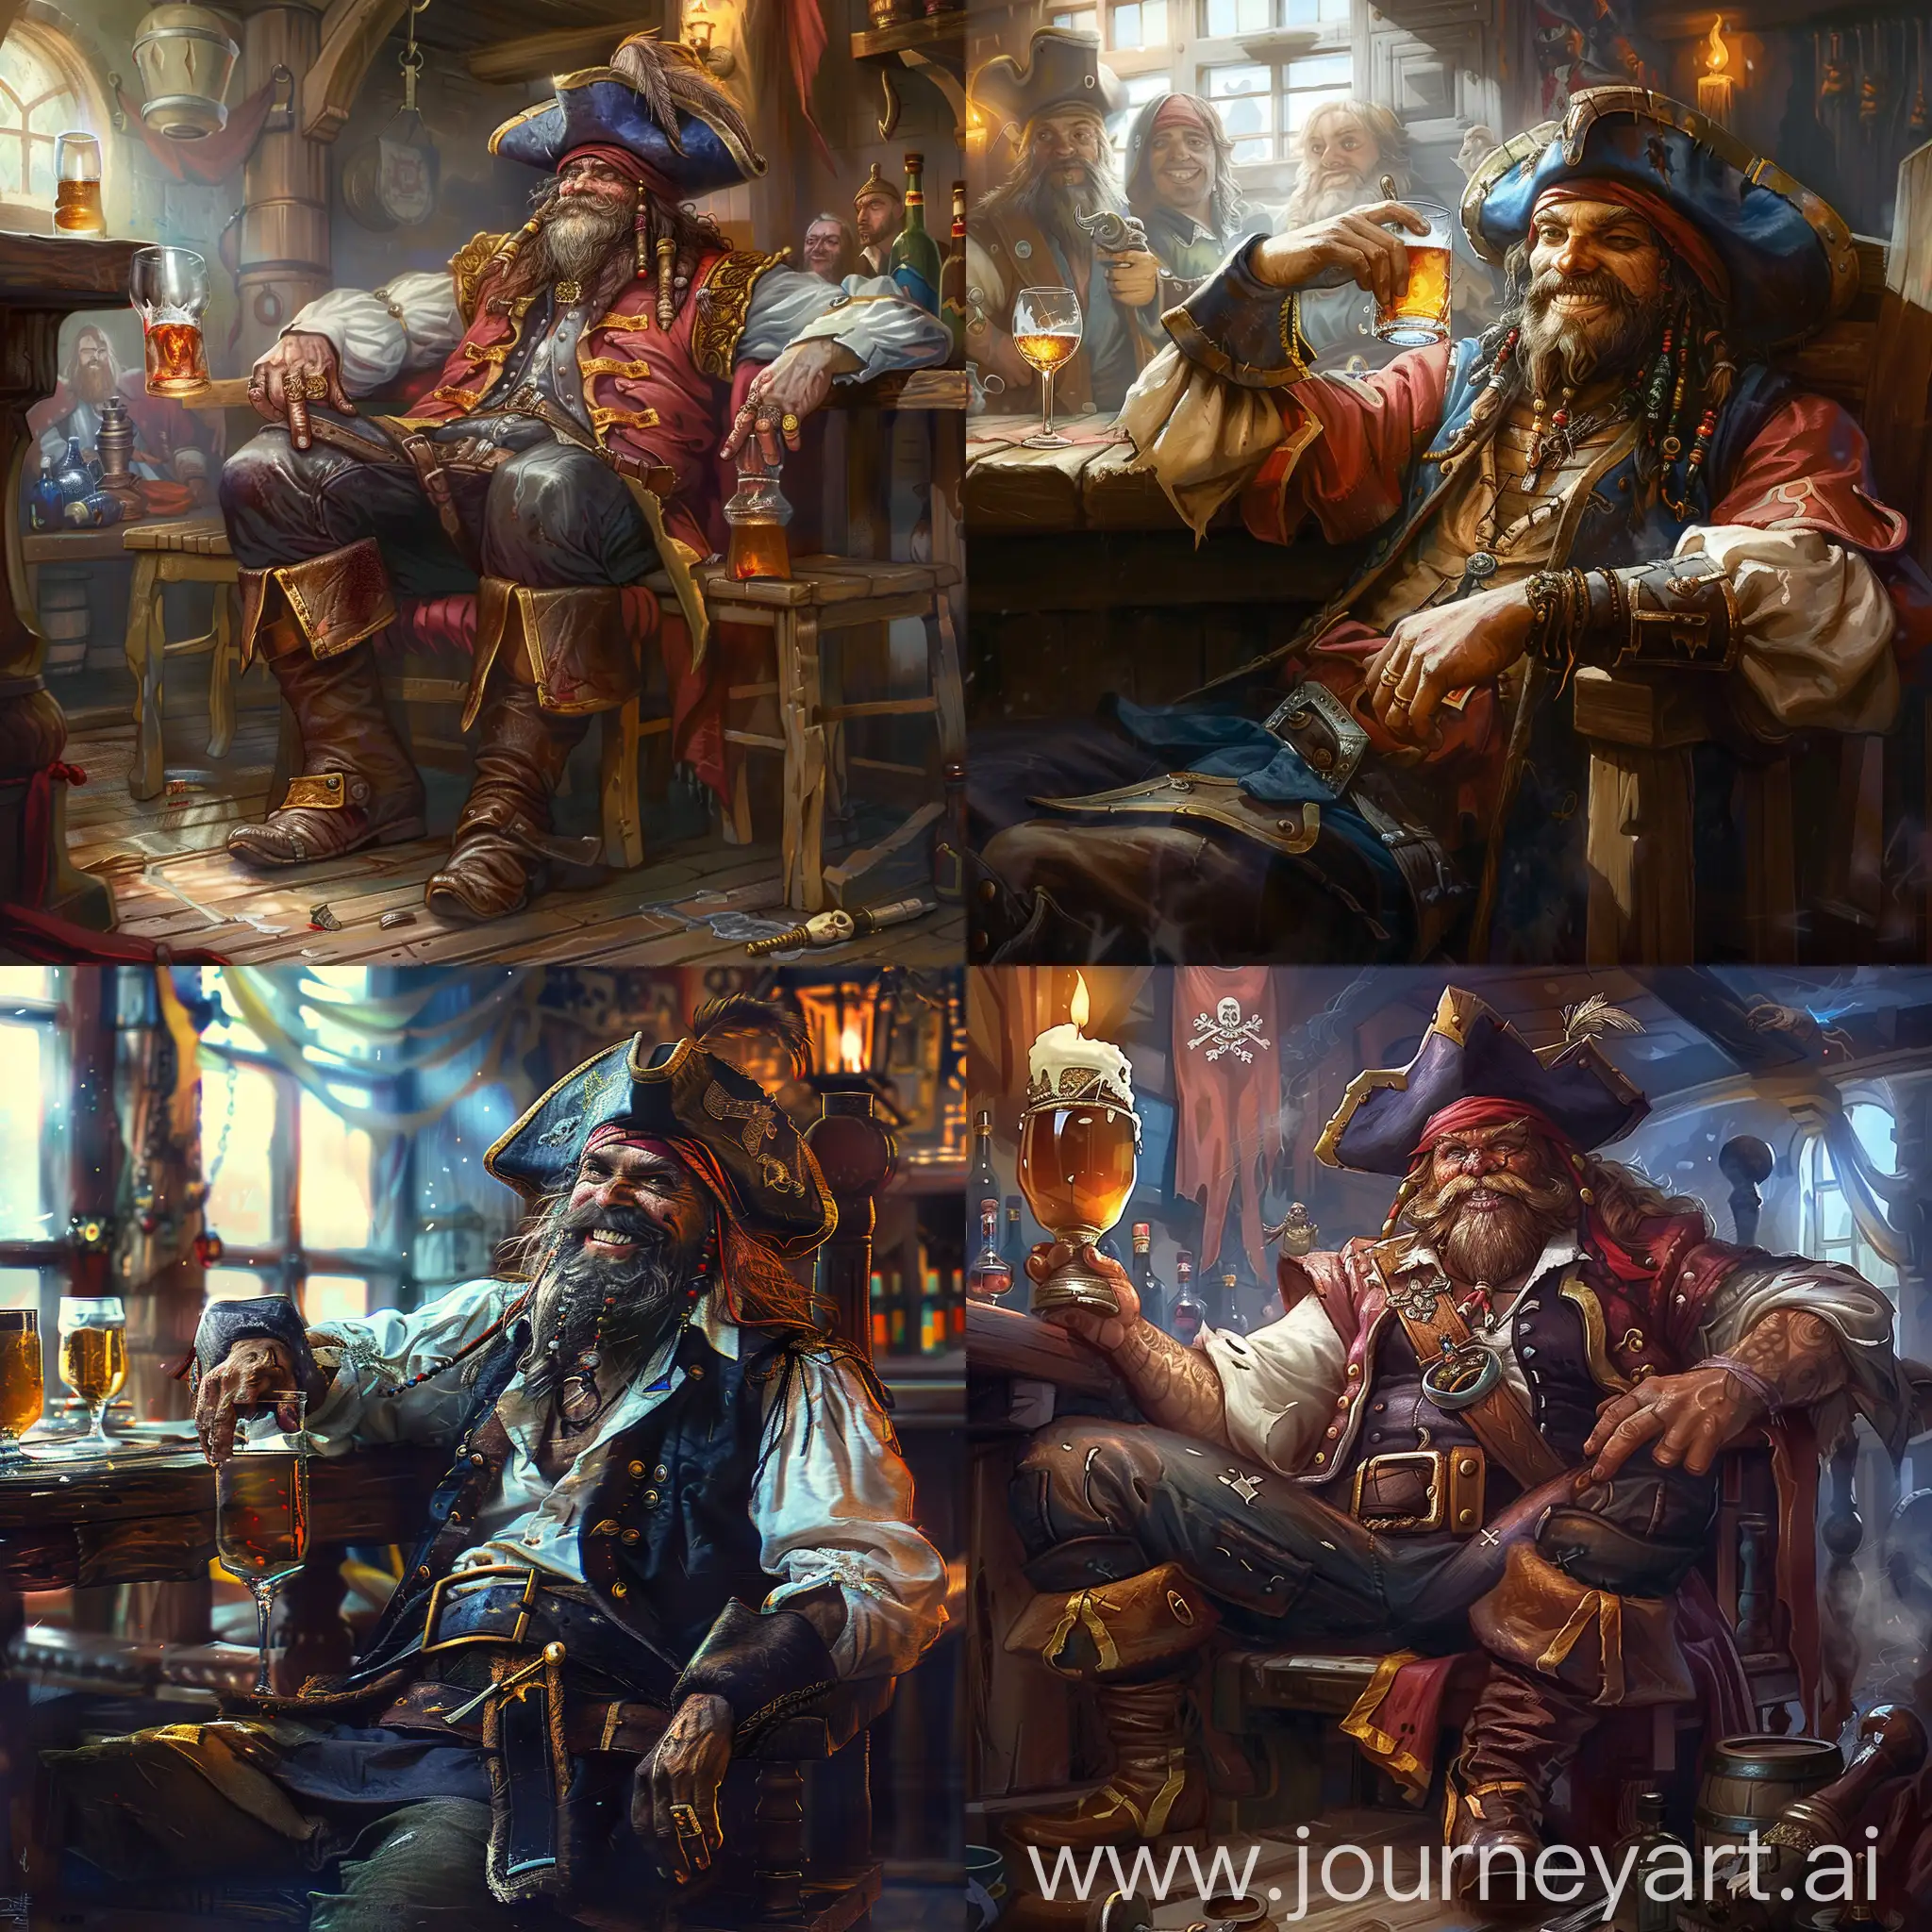 Cheerful-Drunken-Pirate-Relaxing-in-a-Fantasy-Tavern